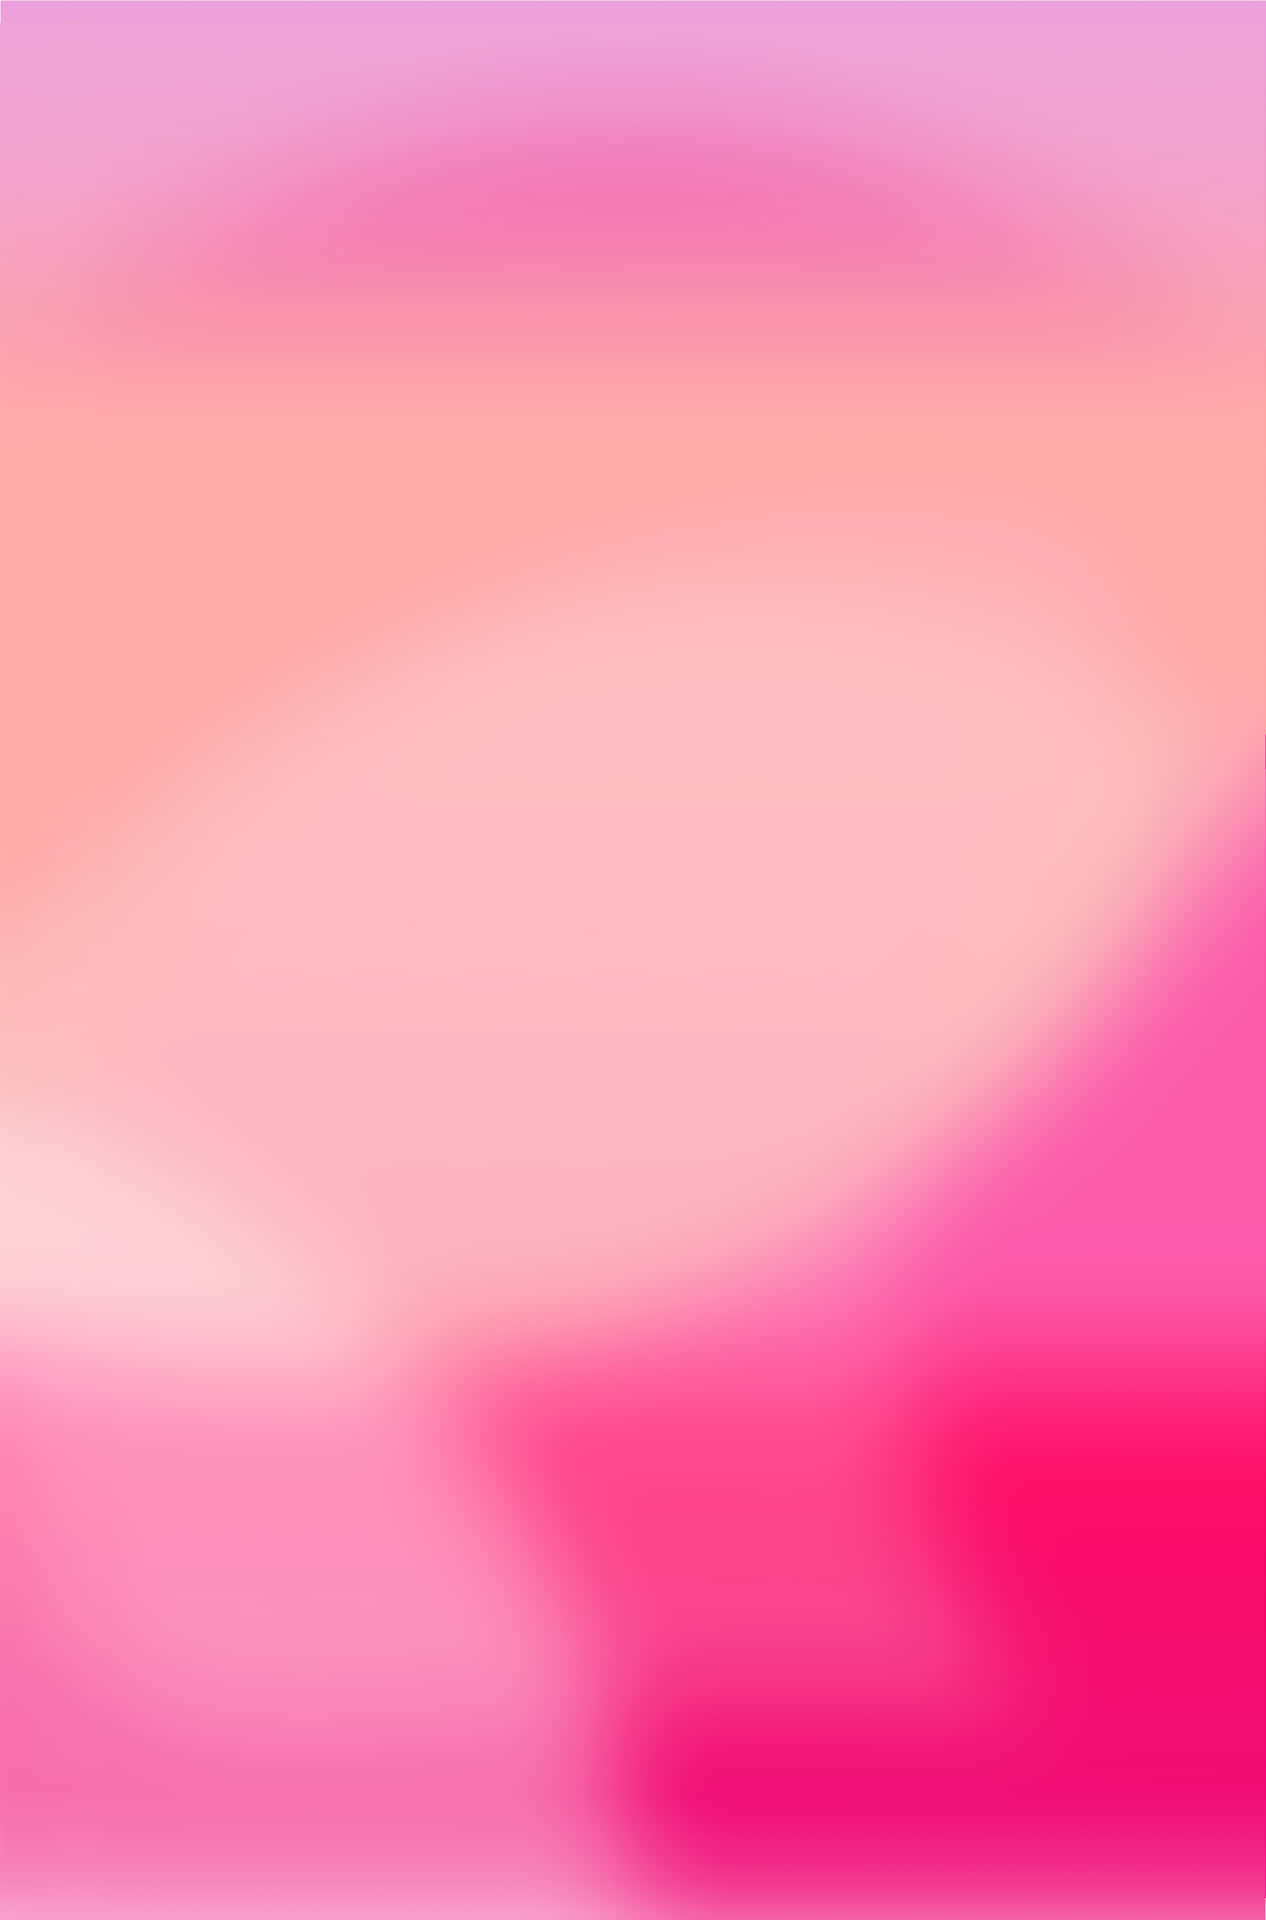 Brighten up your screen with a bold, bright pink background